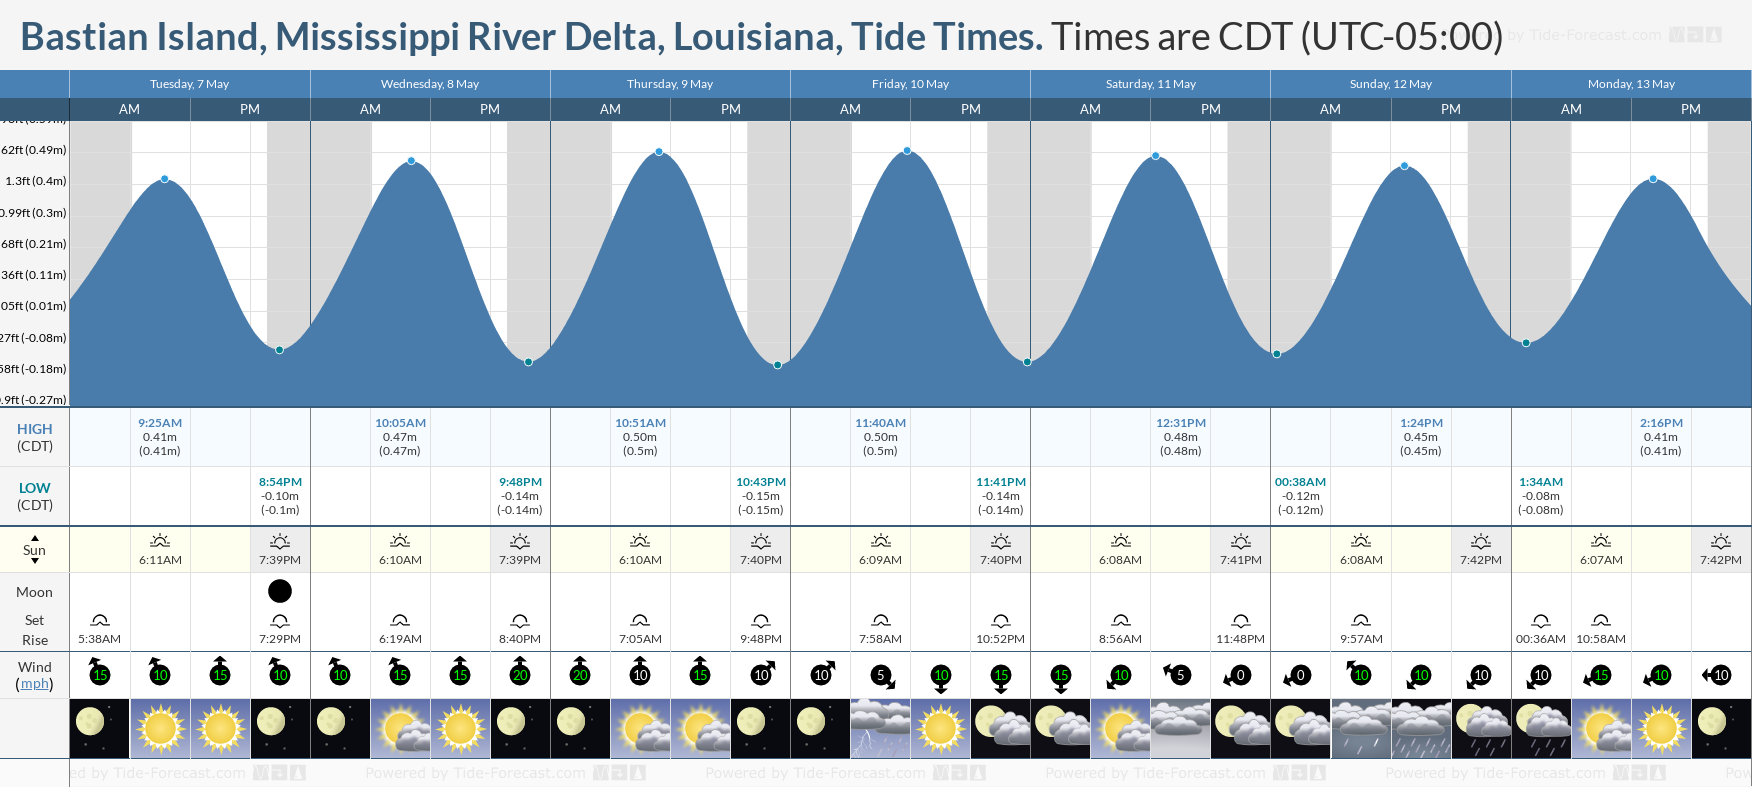 Bastian Island, Mississippi River Delta, Louisiana Tide Chart including high and low tide tide times for the next 7 days